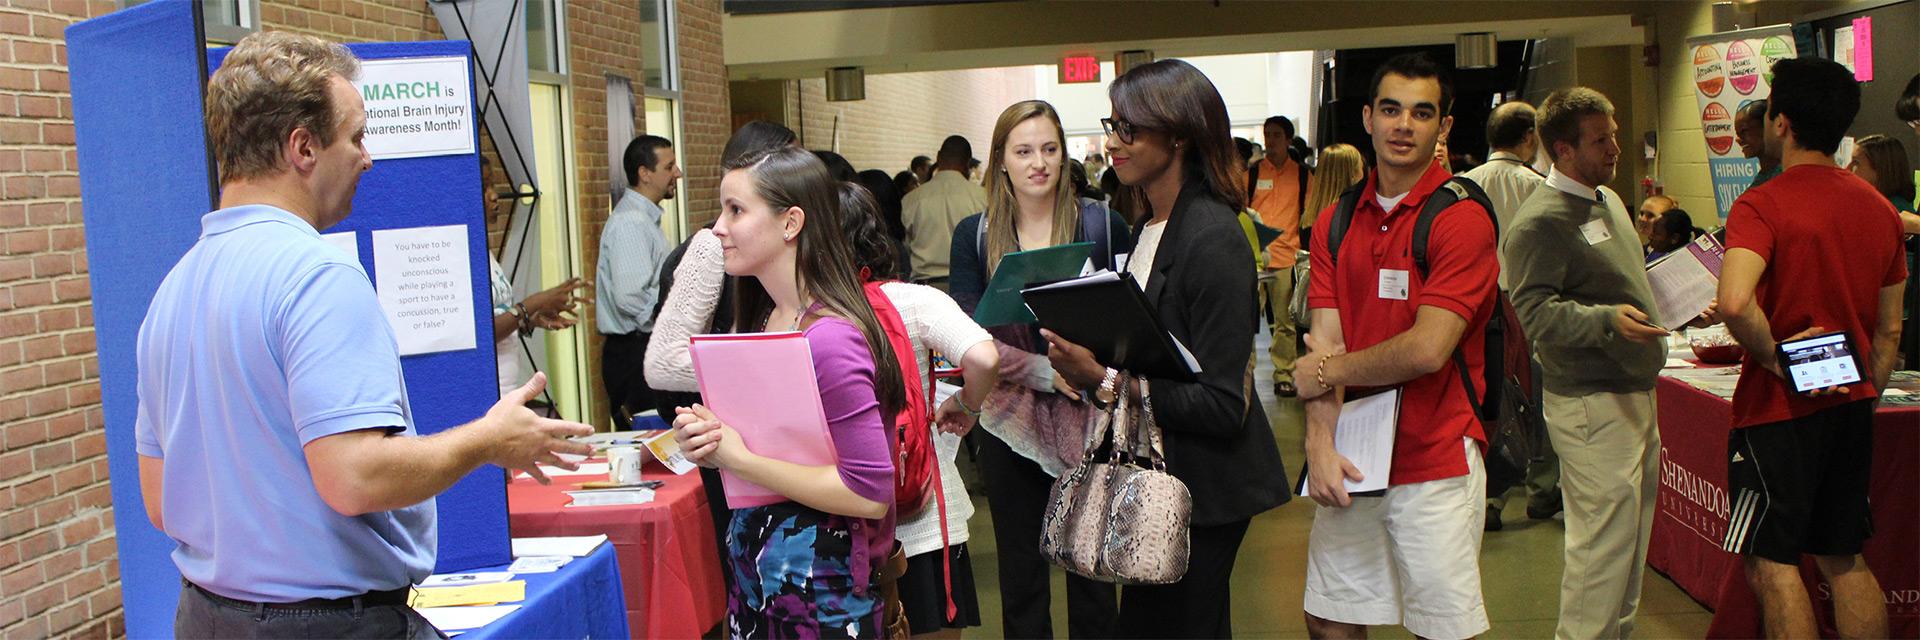 SPH Career Expo, student visiting various tables for career and academic opportunities and resources